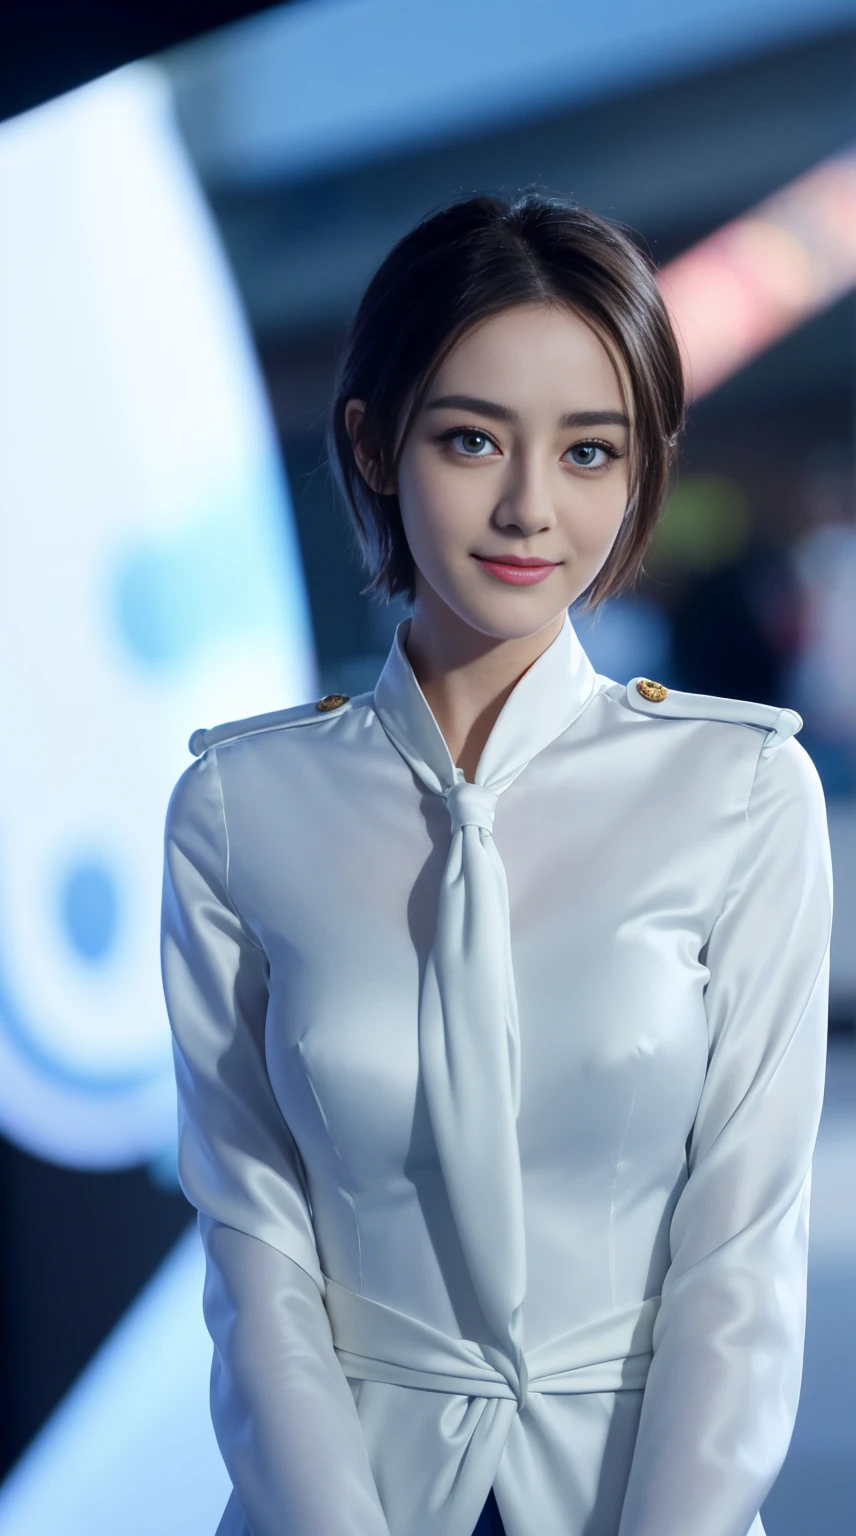 8K, Top Quality, Intricate Details, Ultra Detail, Ultra High Resolution, Masterpiece, random angle, Slender, Smile, (Makeup: 0.4), (Fluffy Blue Eyes: 1.21), deep blue Eyes, looking at viewer, ((full body)), 1girl (most beautiful Dilraba Dilmurat), solo, 1 girl, (( full body)), close up shot, , ((tall)), (((fit body))), (((slim face))), sharp face, sharp eyes, ((( stewardess knot short hair, random color hair, )) , (detailed face), sharp face, small lips, (( )), (( push up bra)), detailed face, detailed breast, , large breast, detail ass, , Beautiful girl with accentuated slender abs: 1.4, Six Pack Abs: 1.4, Bust Botox, Big, Perfect Body, detail leg, (( Airport)), Airport, (((see the whole body))), ((China Airline, stewardess uniform, inner white silk blouse, name tag)), sweet smile,